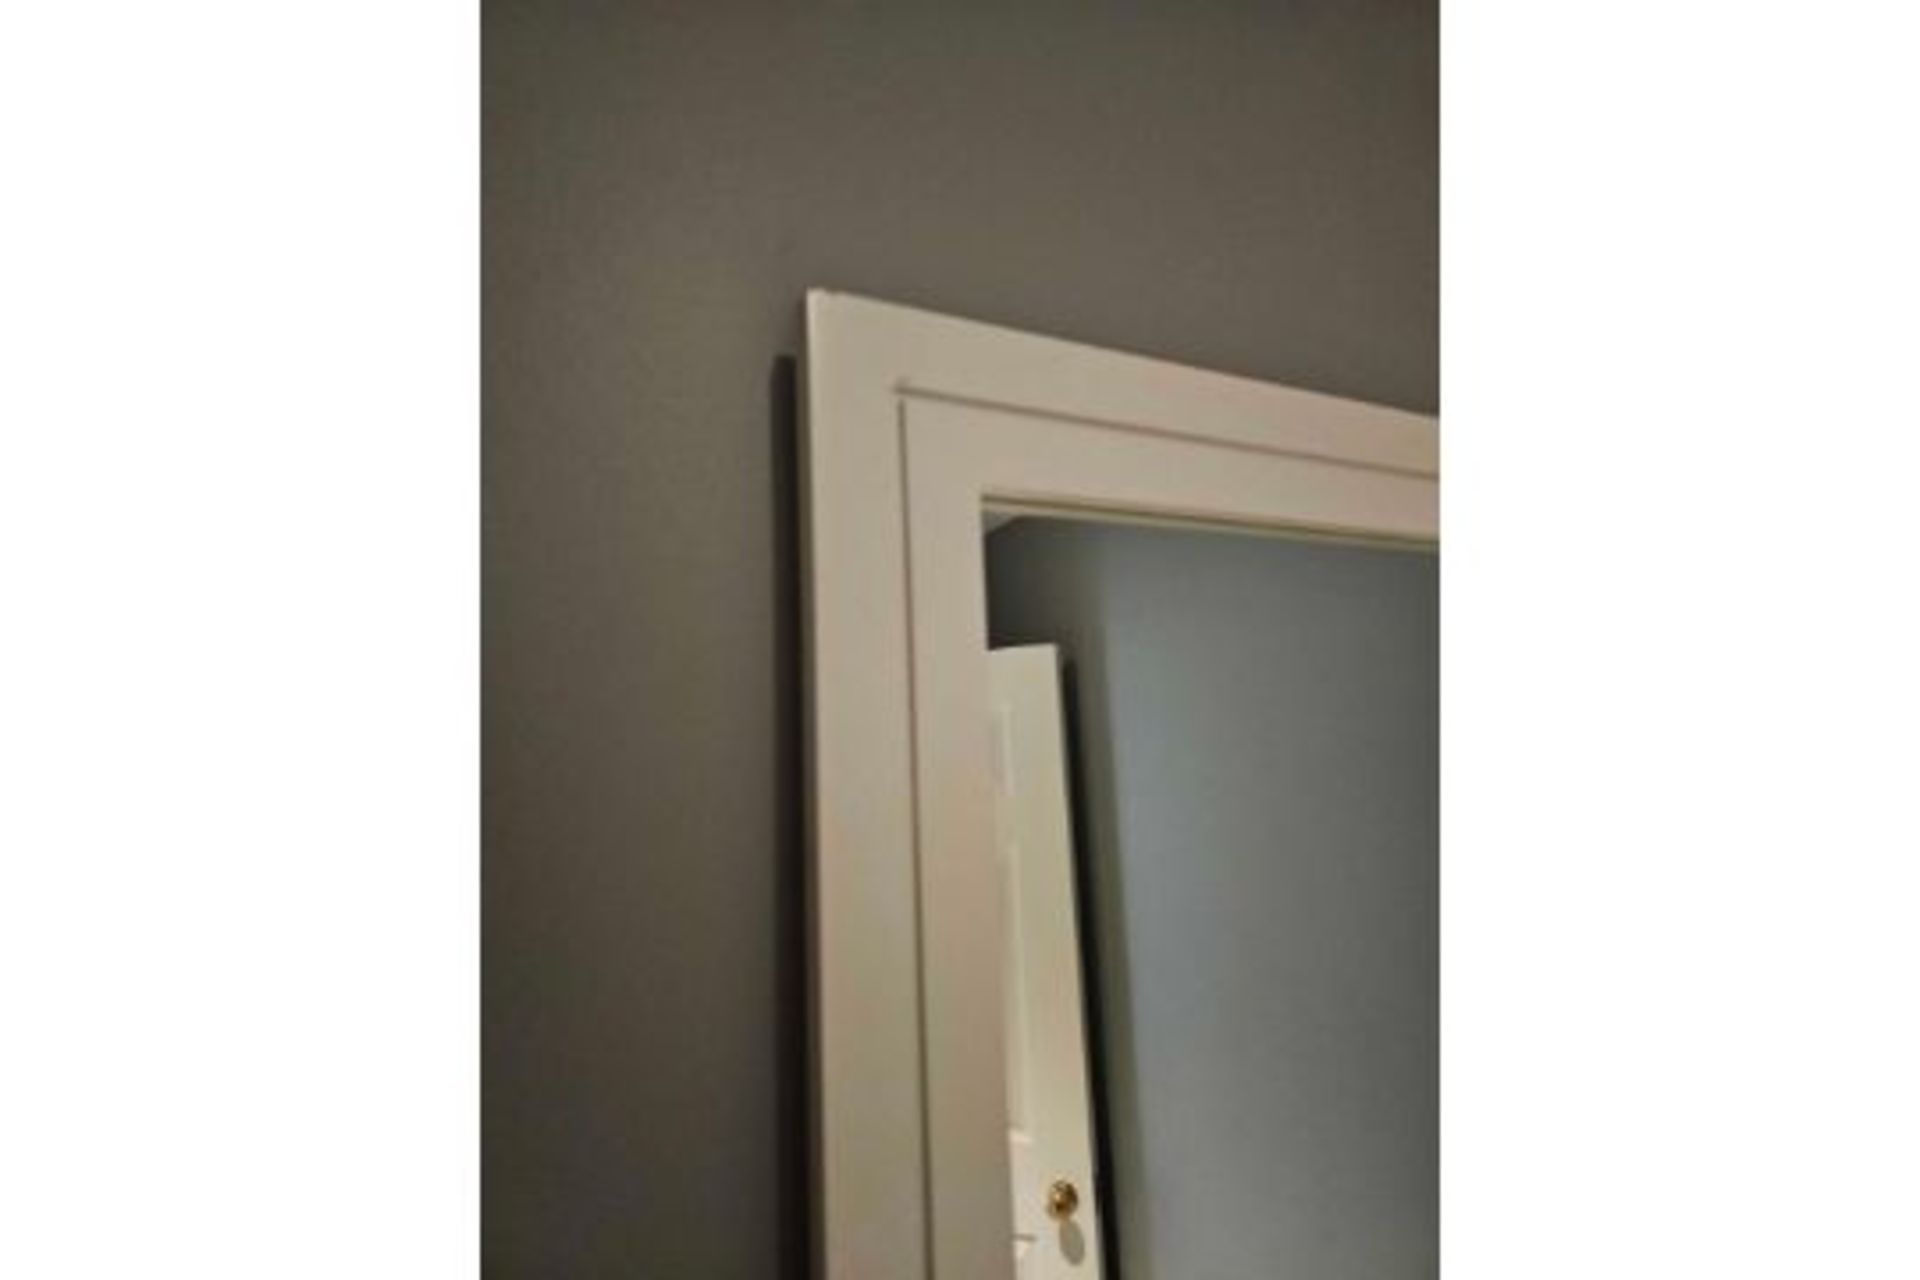 Full Height Dress Mirror A Bright White Gloss Finish On A Clean, Contemporary, Classic Design, - Image 2 of 2